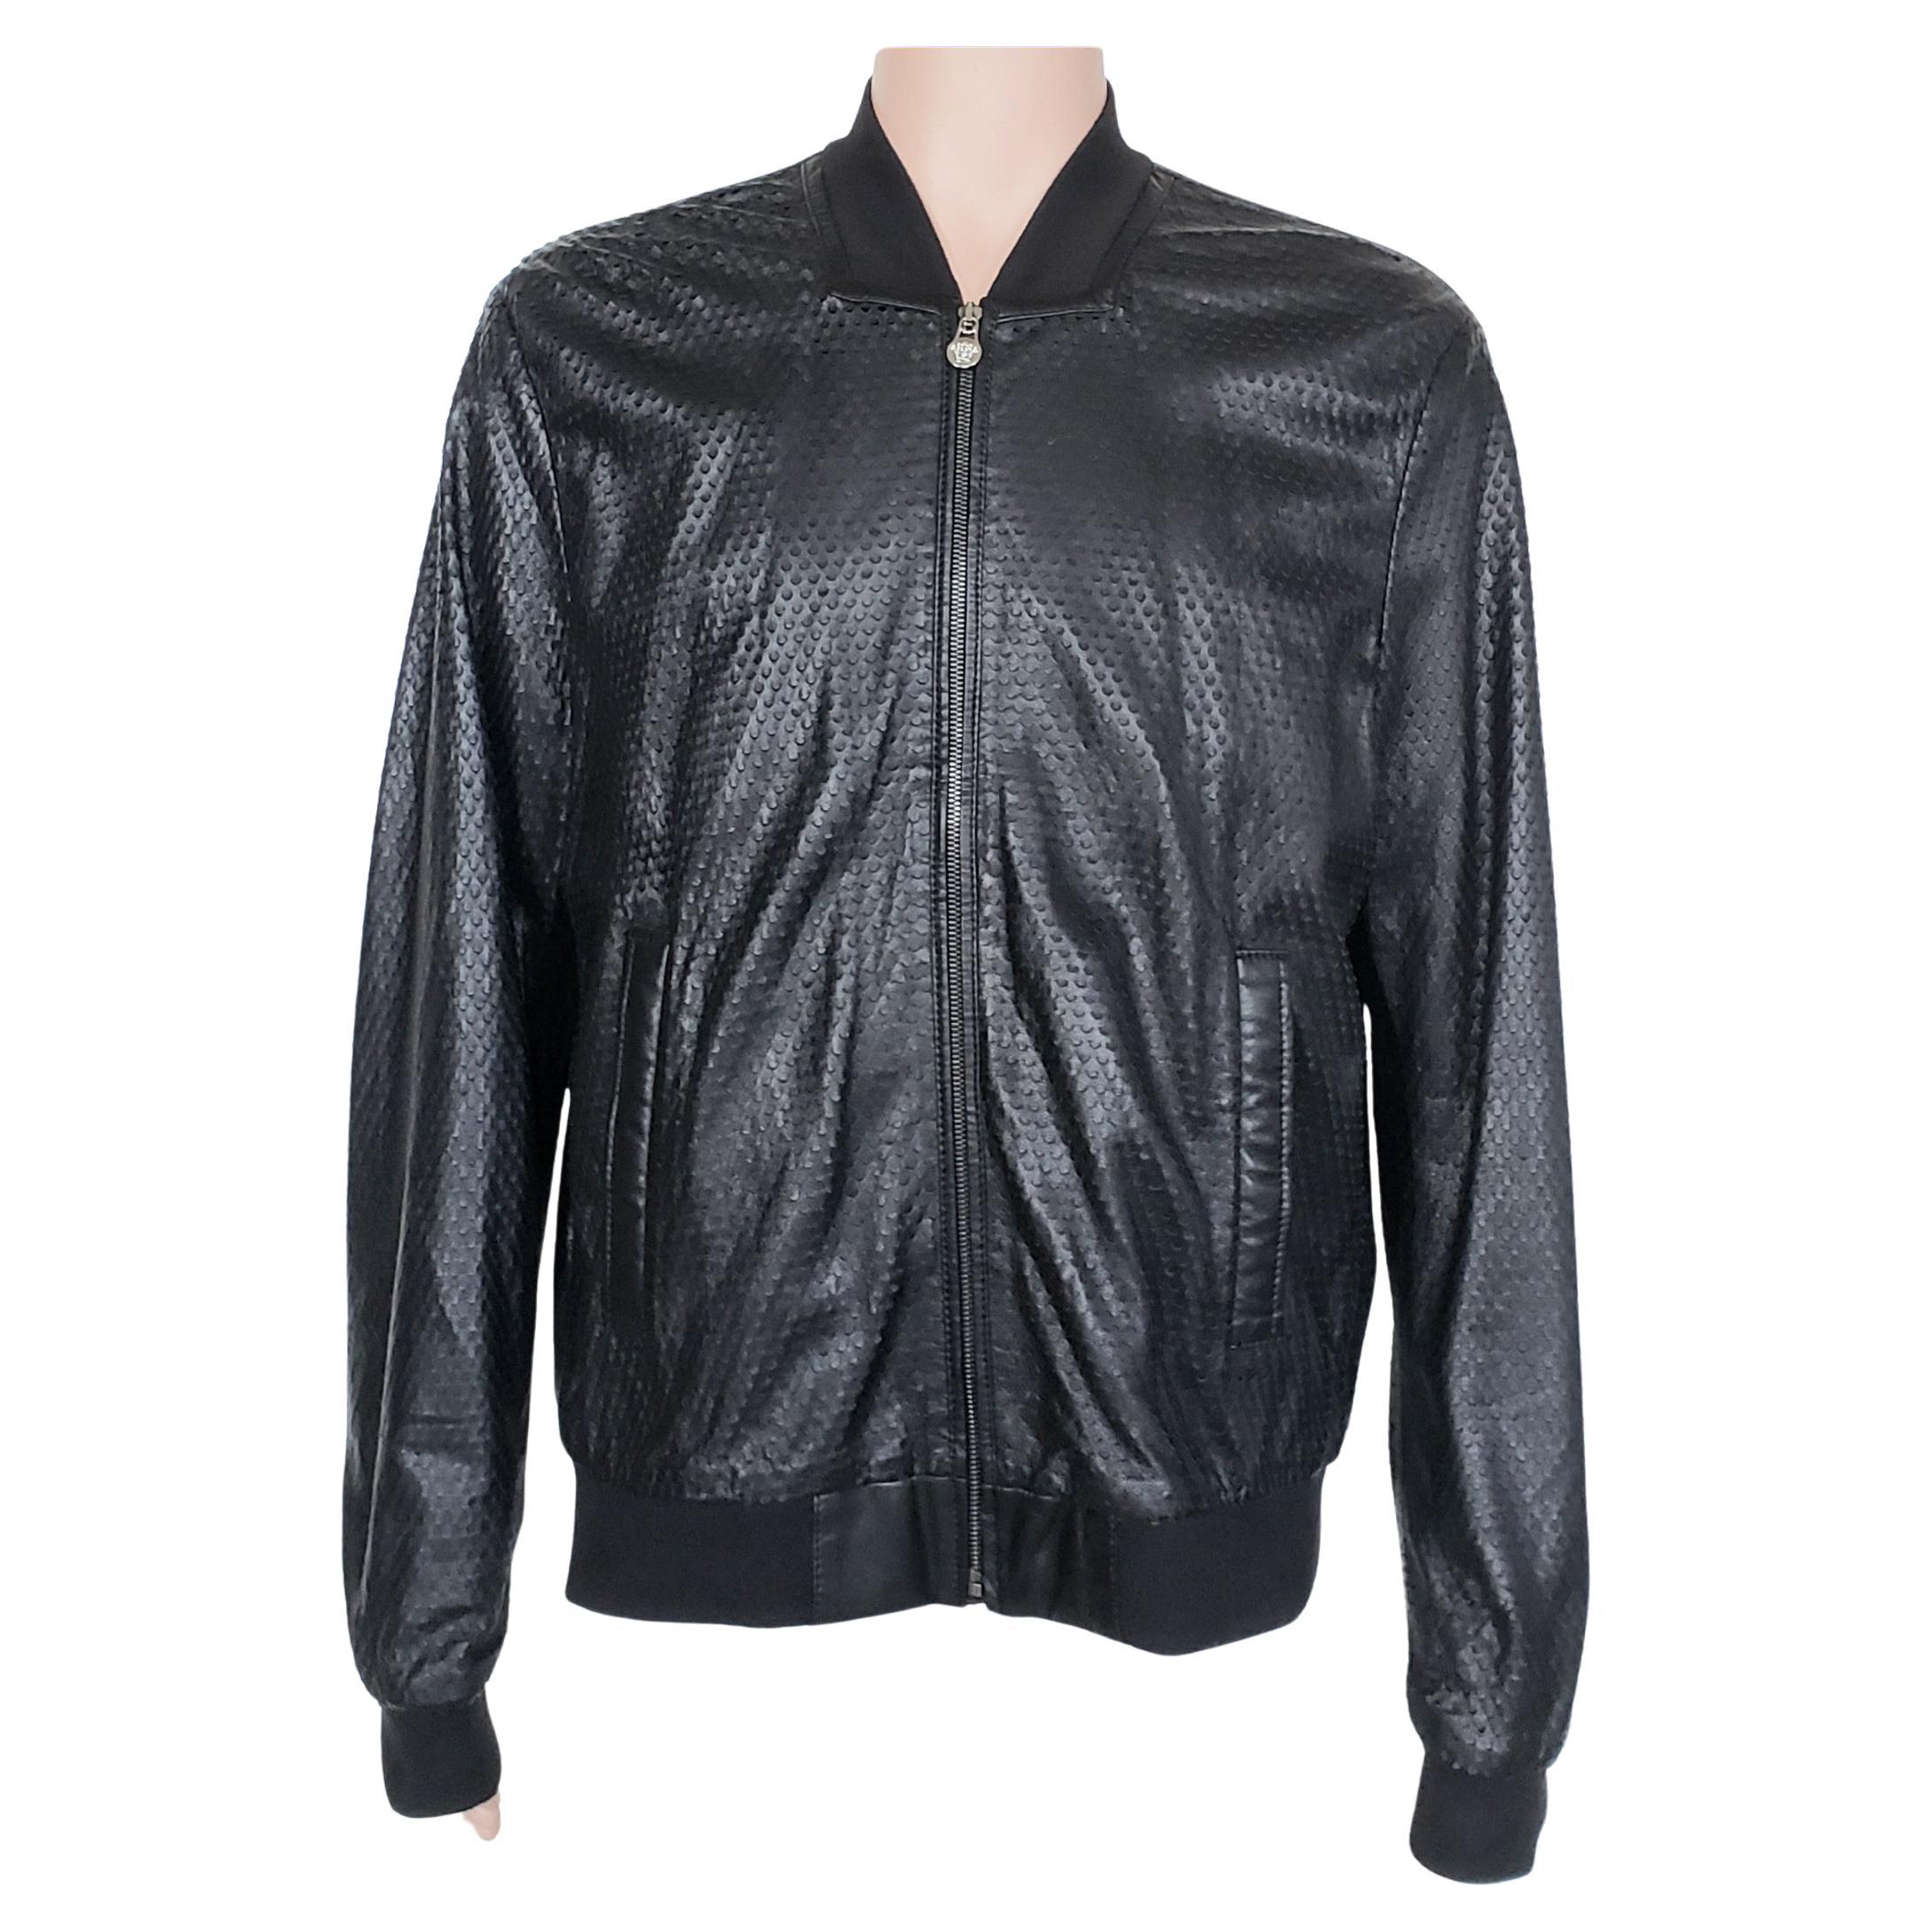 New VERSACE COLLECTION PERFORATED LAMB LEATHER BLACK BOMBER JACKET 56 - 3XL For Sale